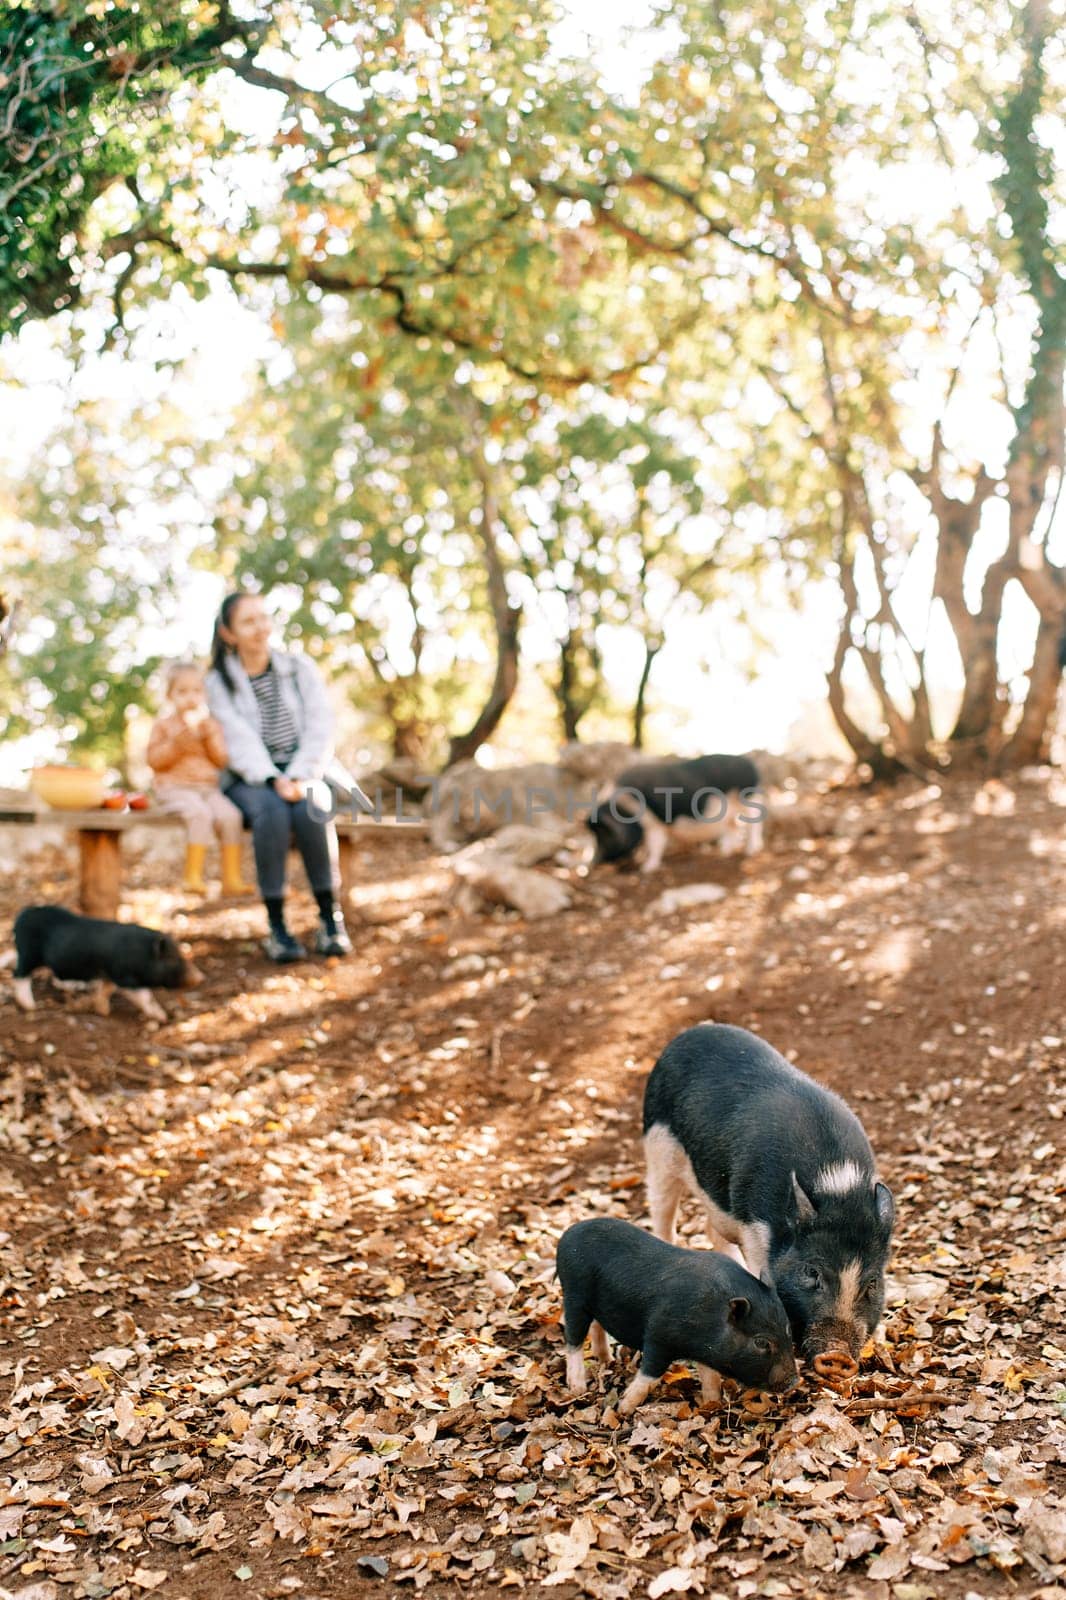 Dwarf pig and a piglet graze in an autumn park against the backdrop of a mother and a little girl sitting on a bench by Nadtochiy